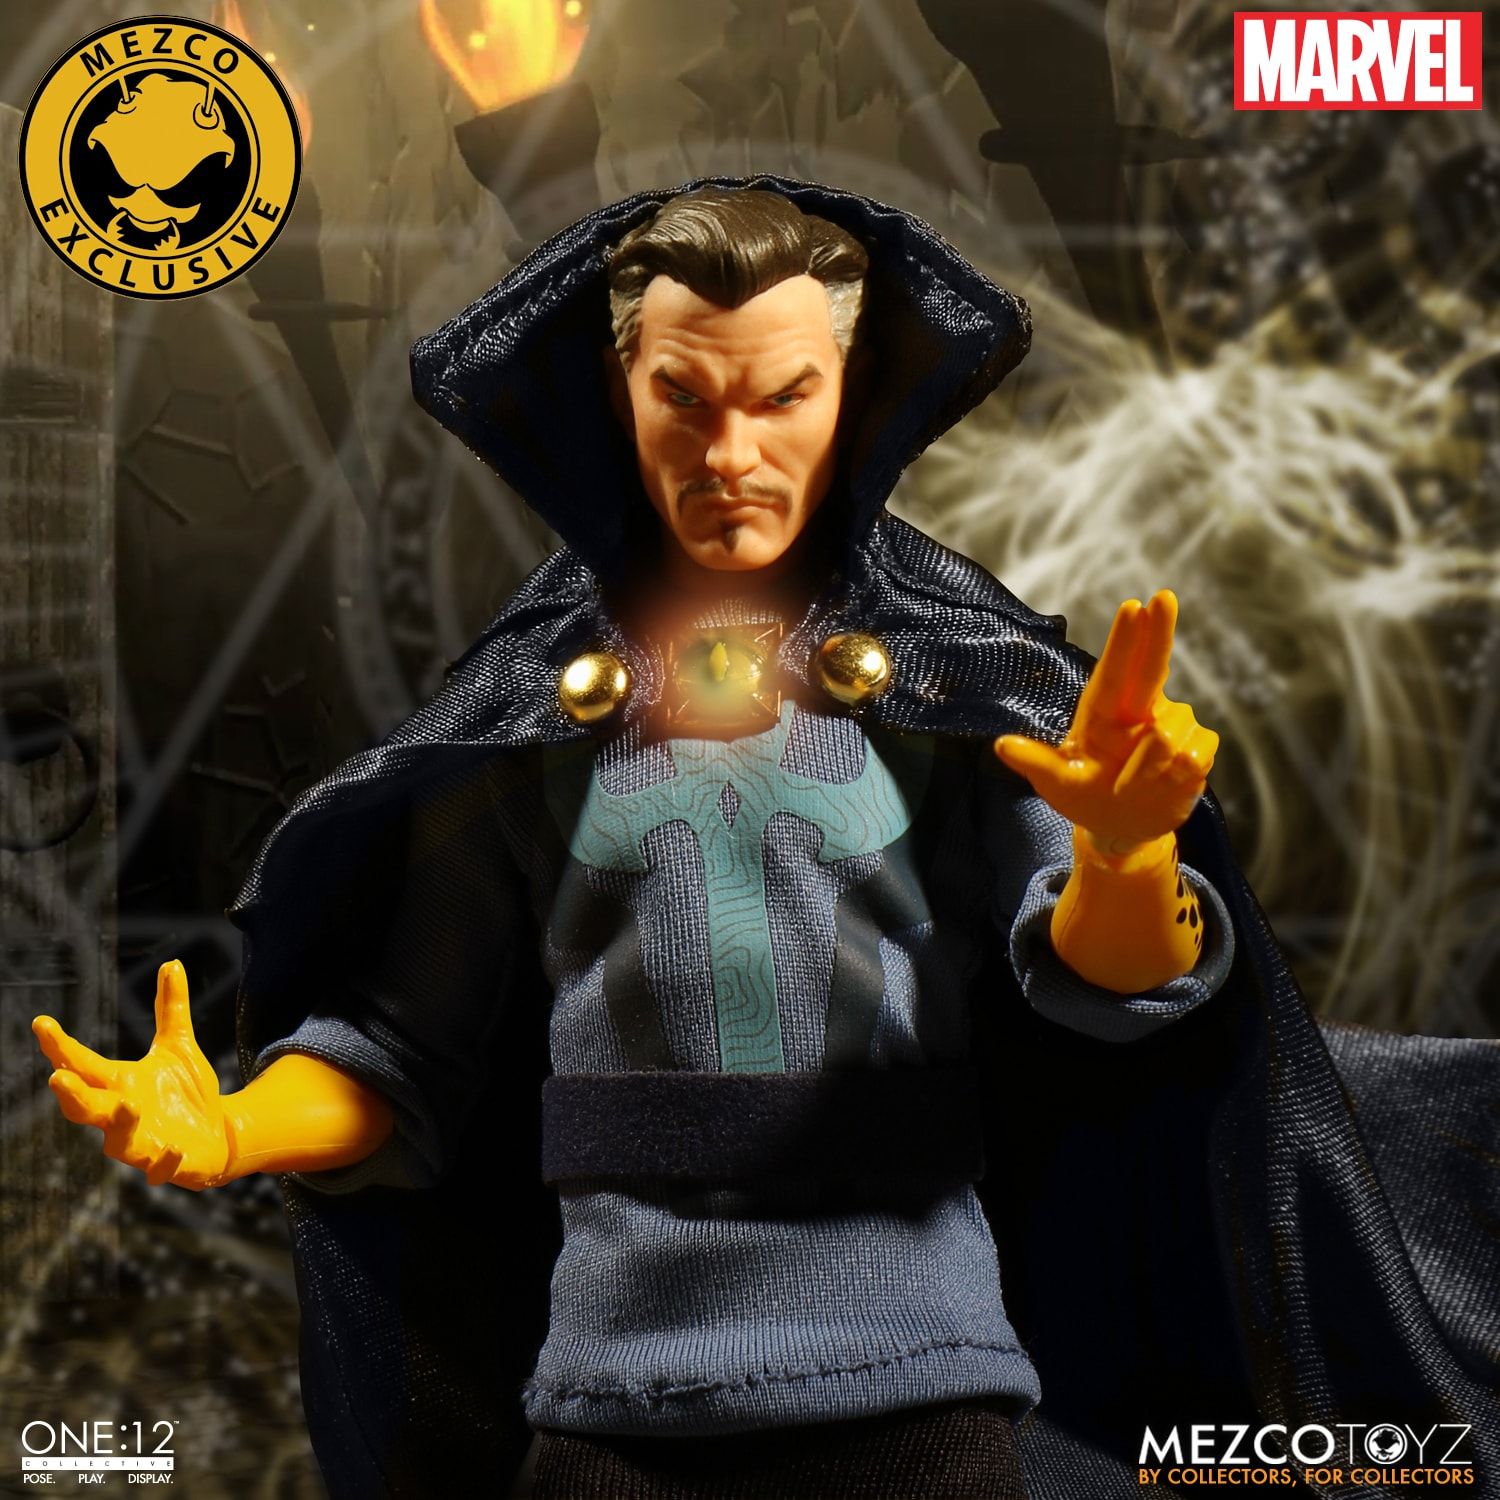 Mezco Toyz ONE:12 Collective: Dr. Strange First Appearance Edition Action Figure